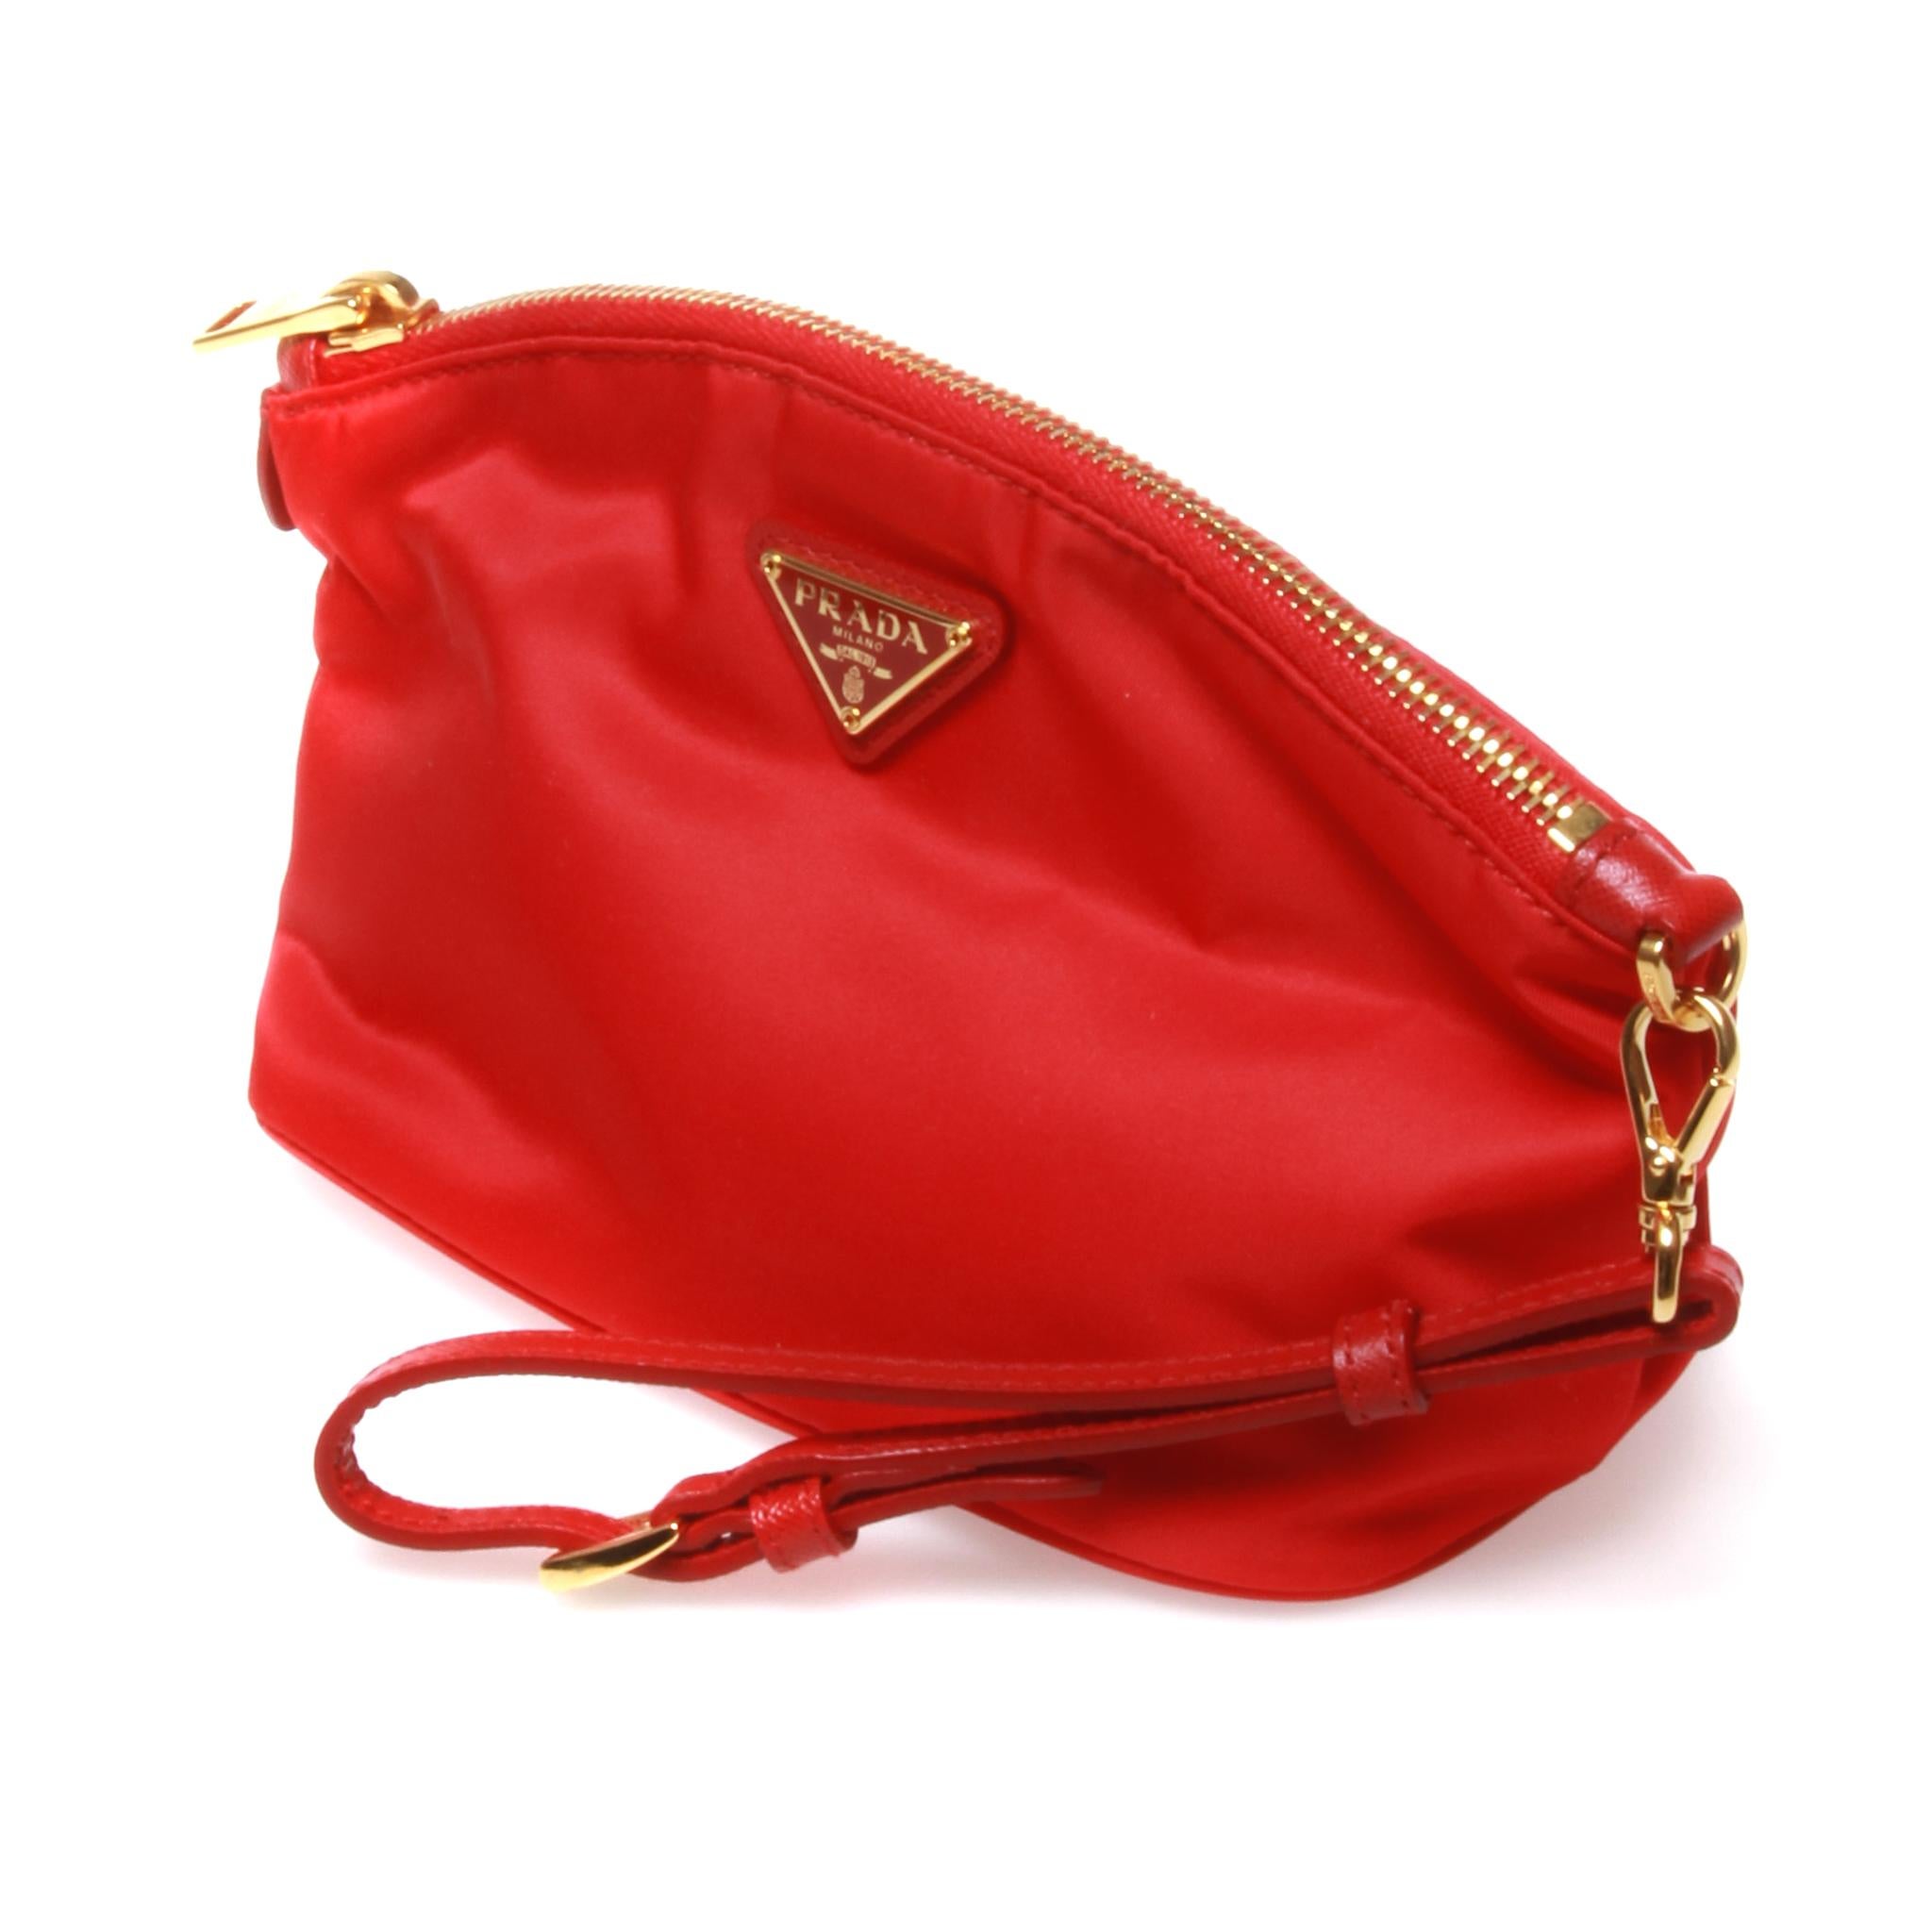 Nylon Prada Clutch Bag with gold hardware and red leather strap